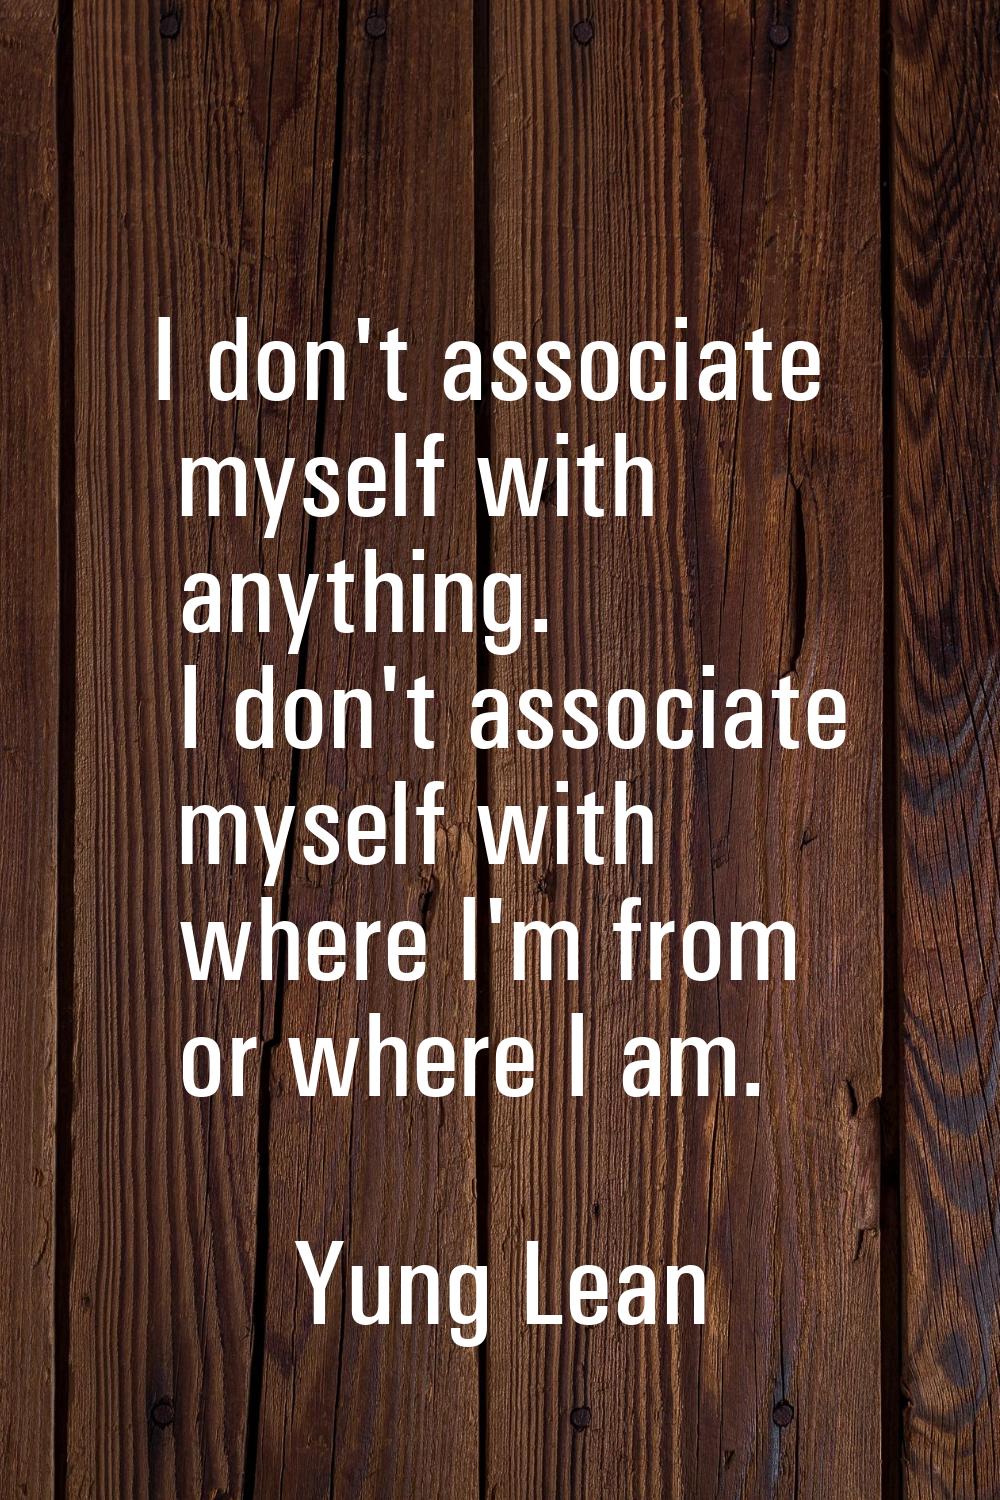 I don't associate myself with anything. I don't associate myself with where I'm from or where I am.